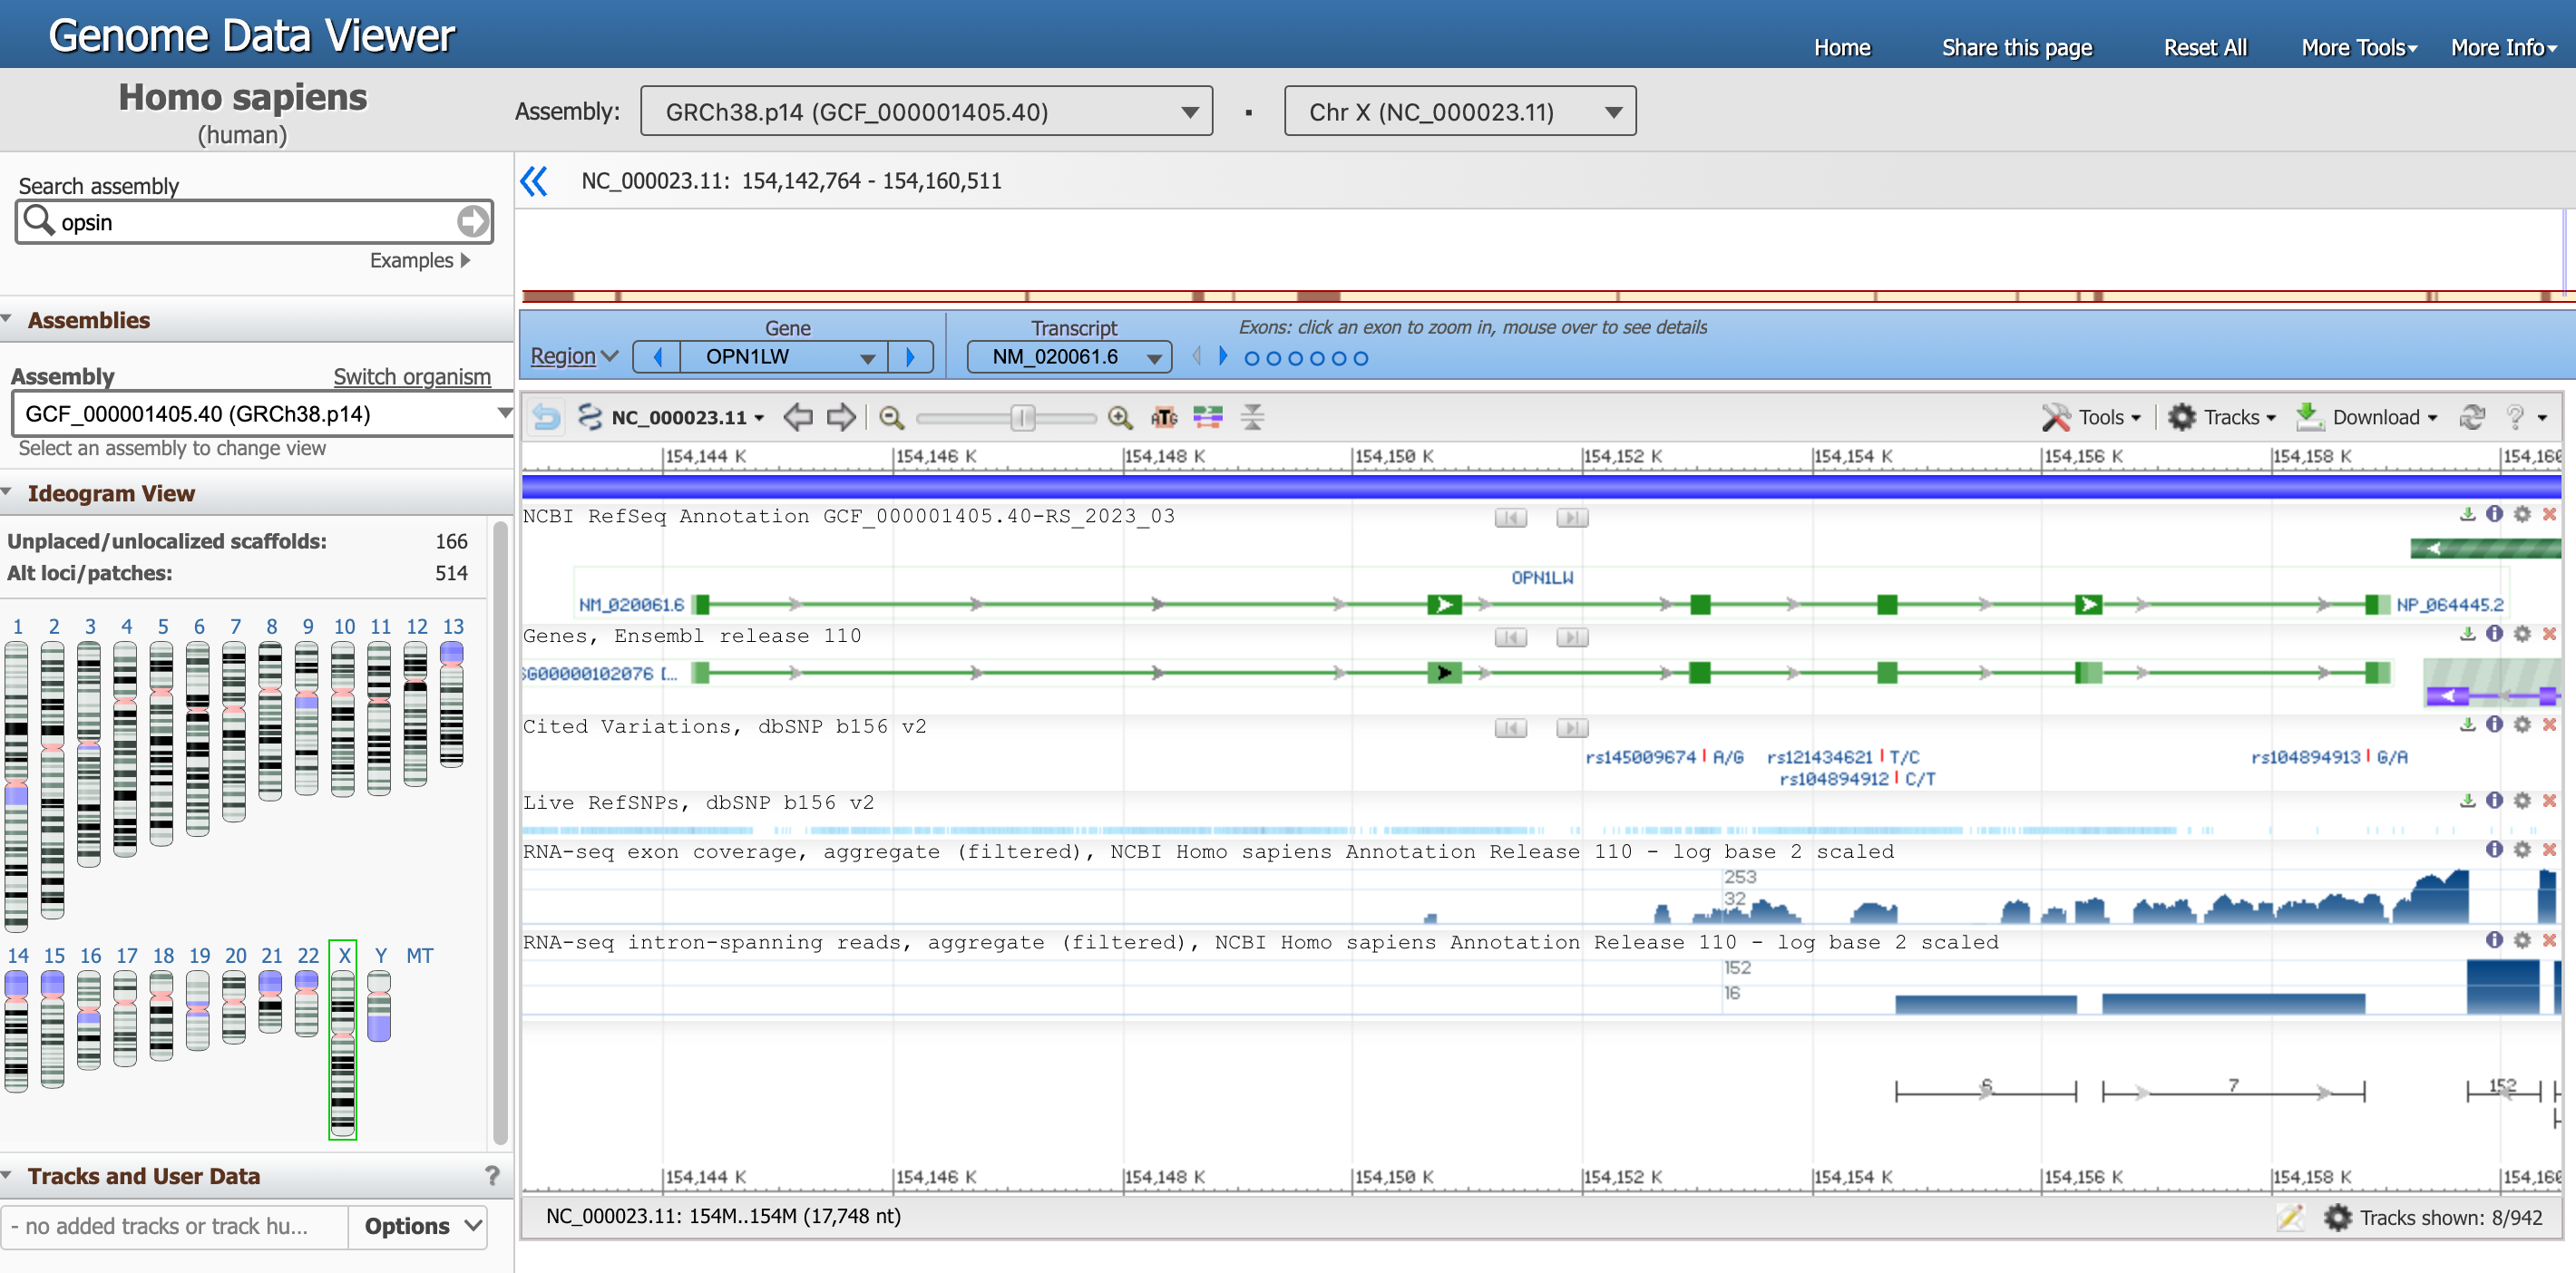 Genome Data Viewer of gene OPN1LW, screenshot of the two main panels of the viewer, with chromosomes on the left and the feature viewer on the right.